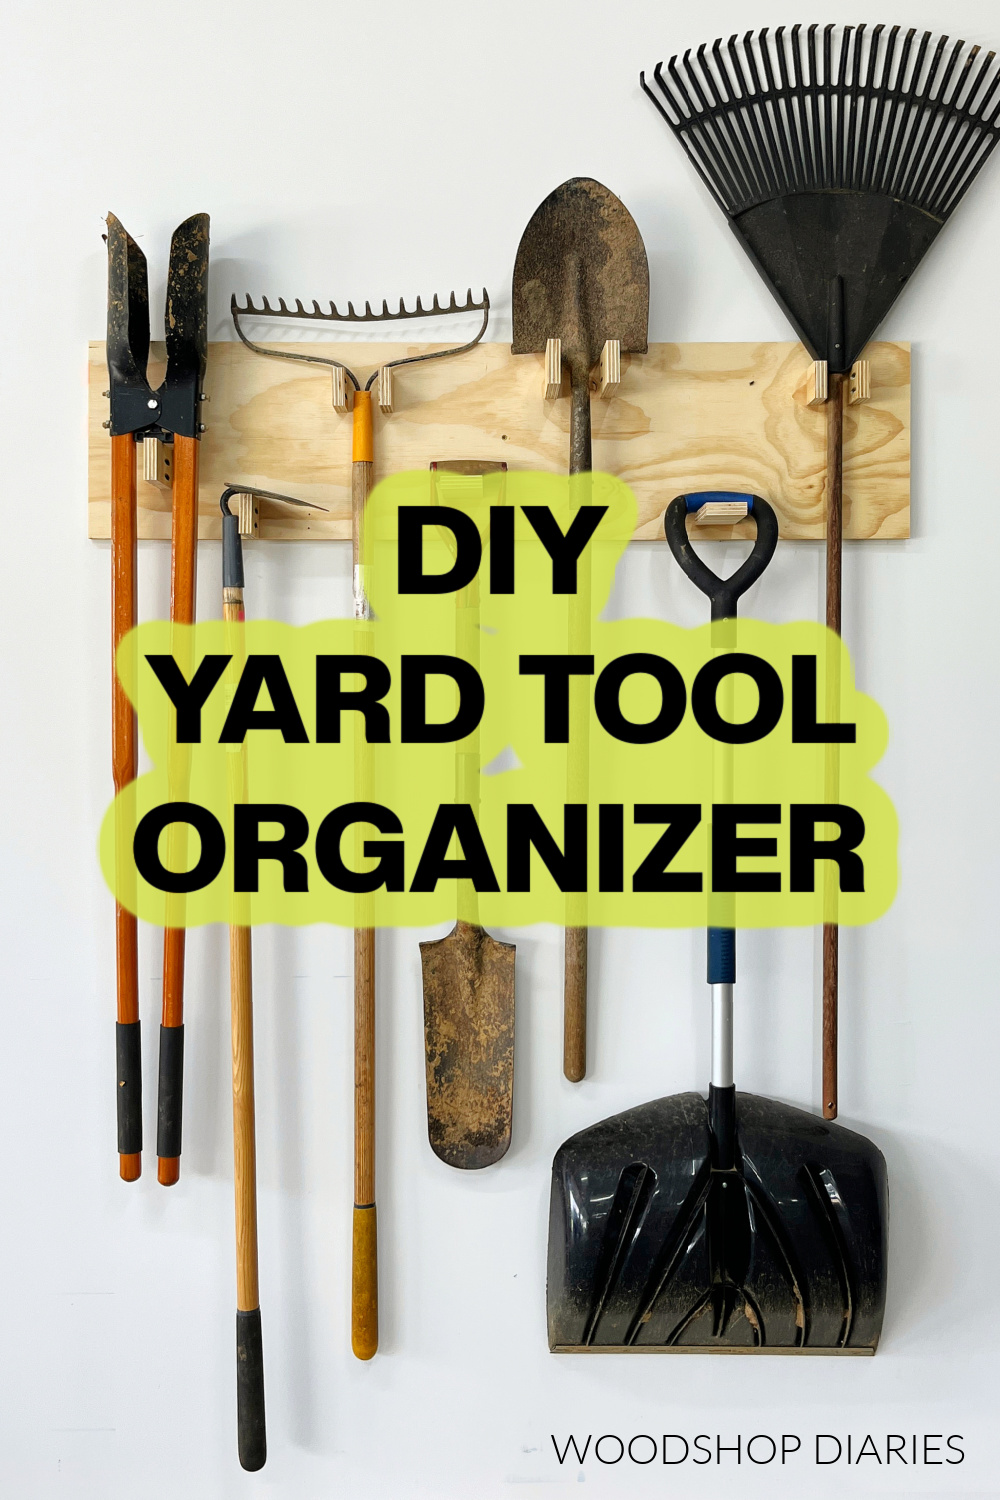 Pinterest image showing yard tool organizer hanging on white wall with text "DIY yard tool organizer" in green outline in center